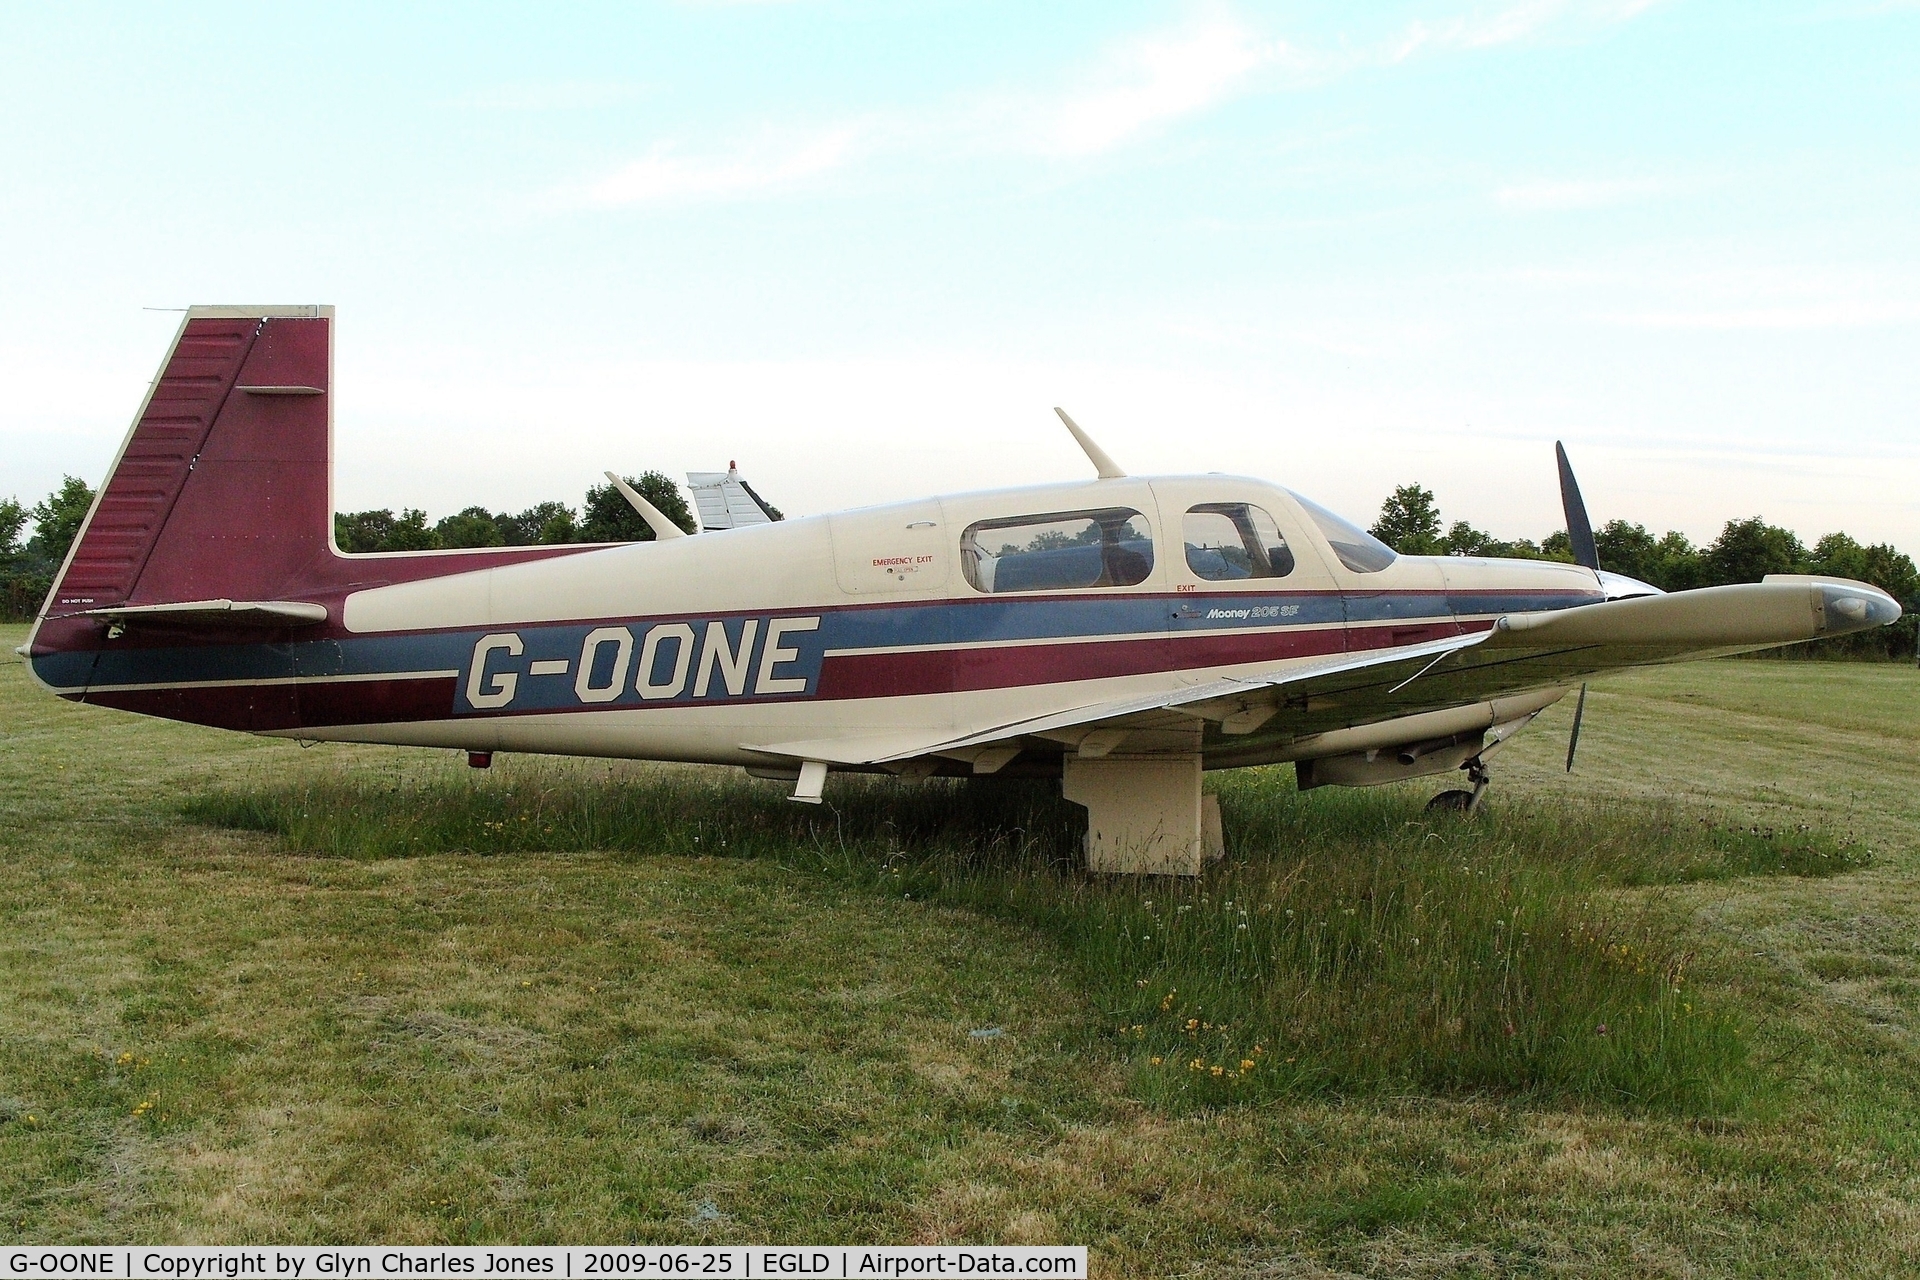 G-OONE, 1987 Mooney M20J 201 C/N 24-3039, Owned by Go One Aviation Ltd. With thanks to Denham Control Tower.